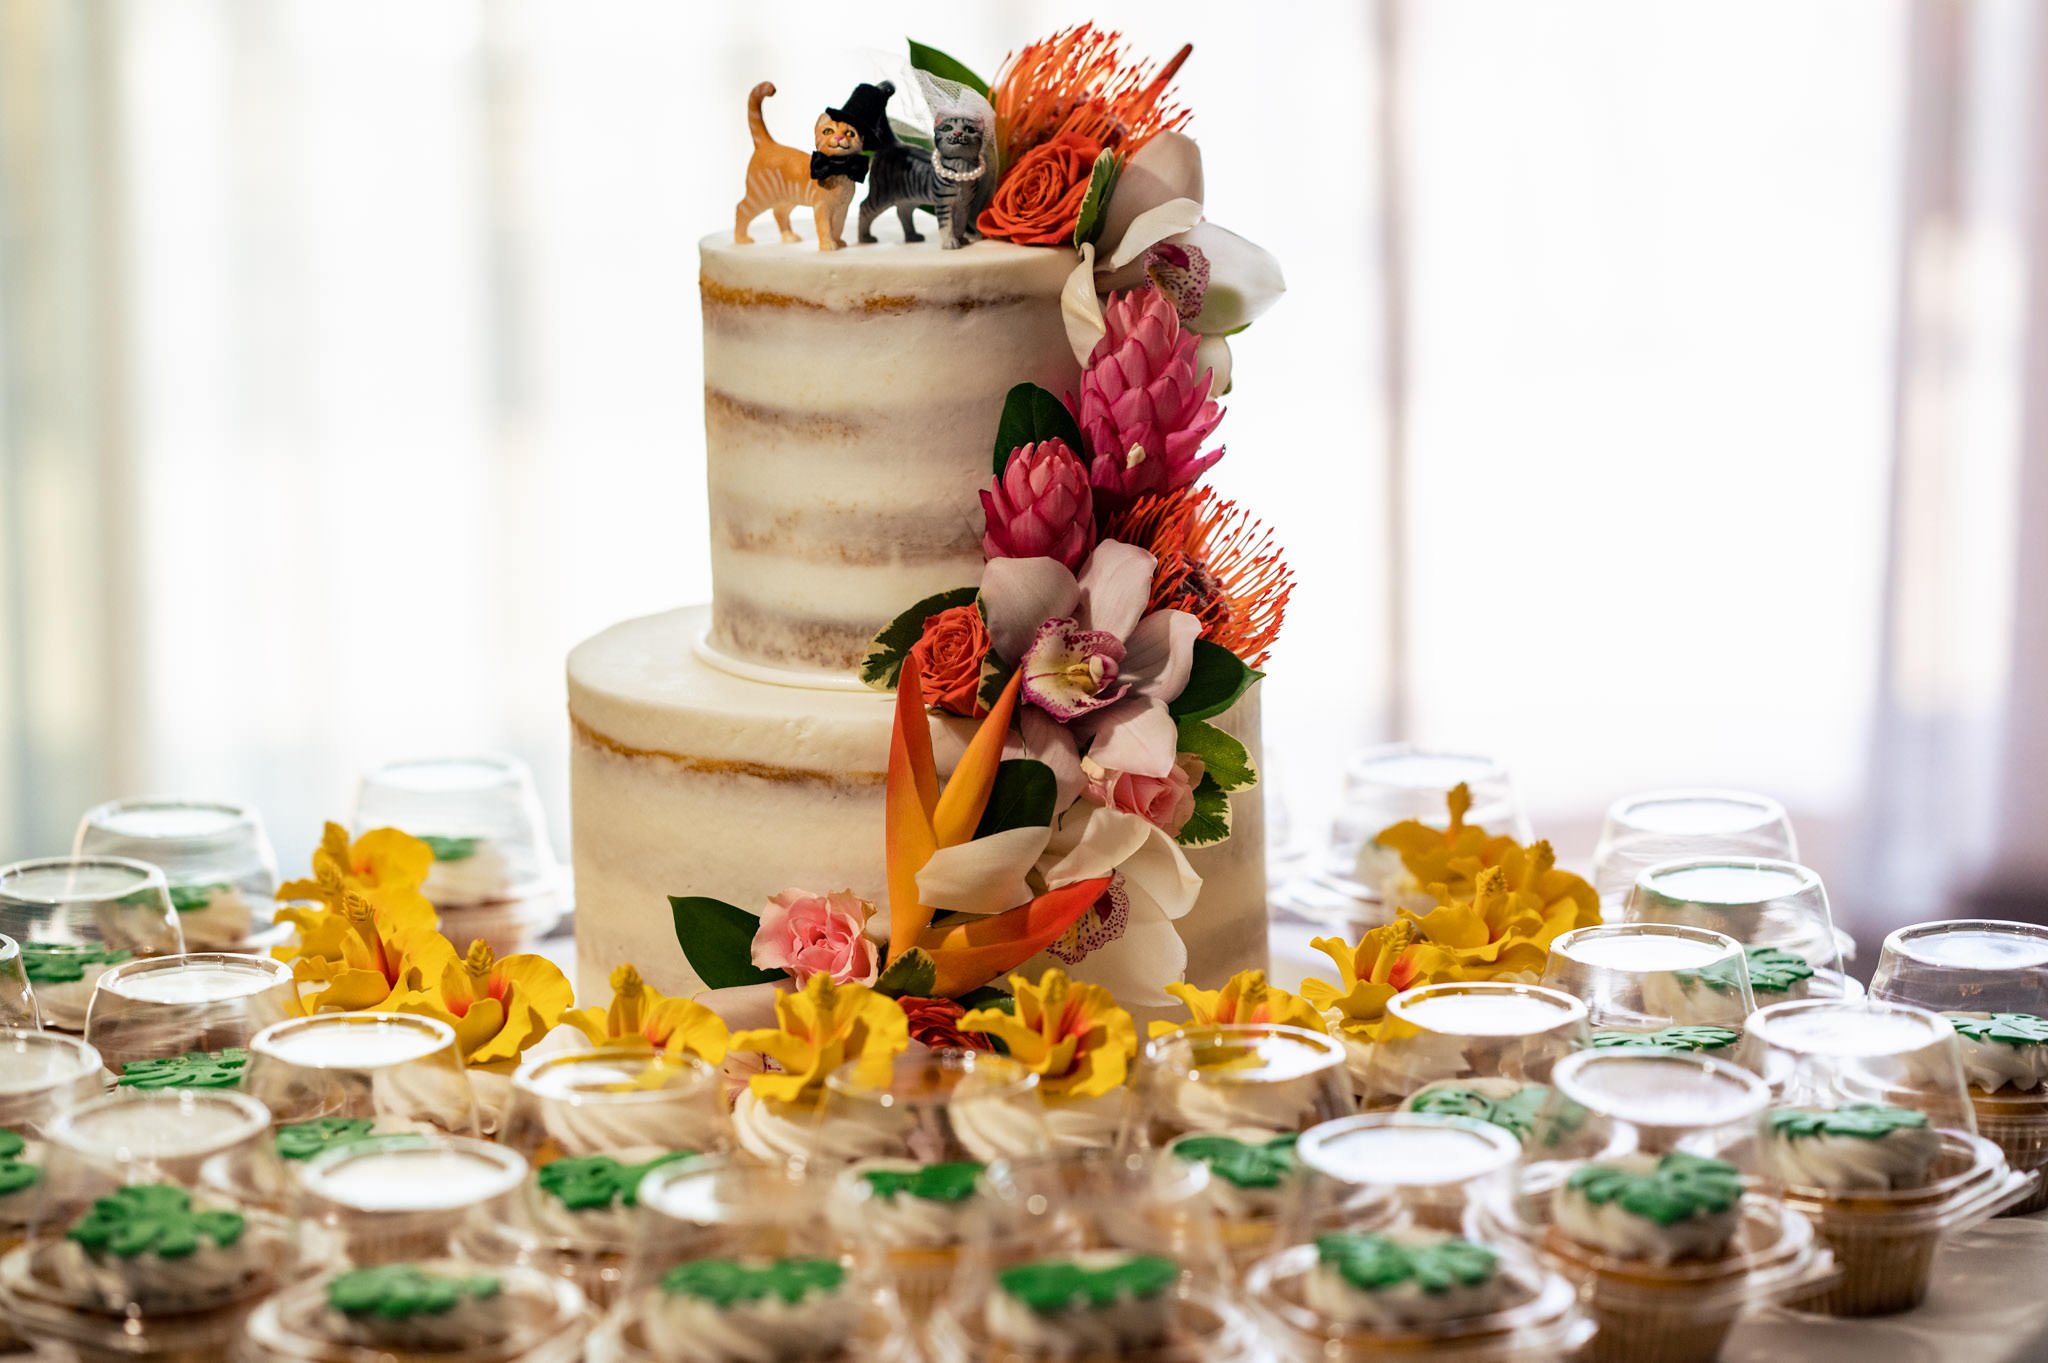 A two-tiered wedding cake adorned with colorful flowers and a cake topper featuring two small cat figurines, surrounded by individual dessert cups, perfect for a destination wedding in Honolulu.